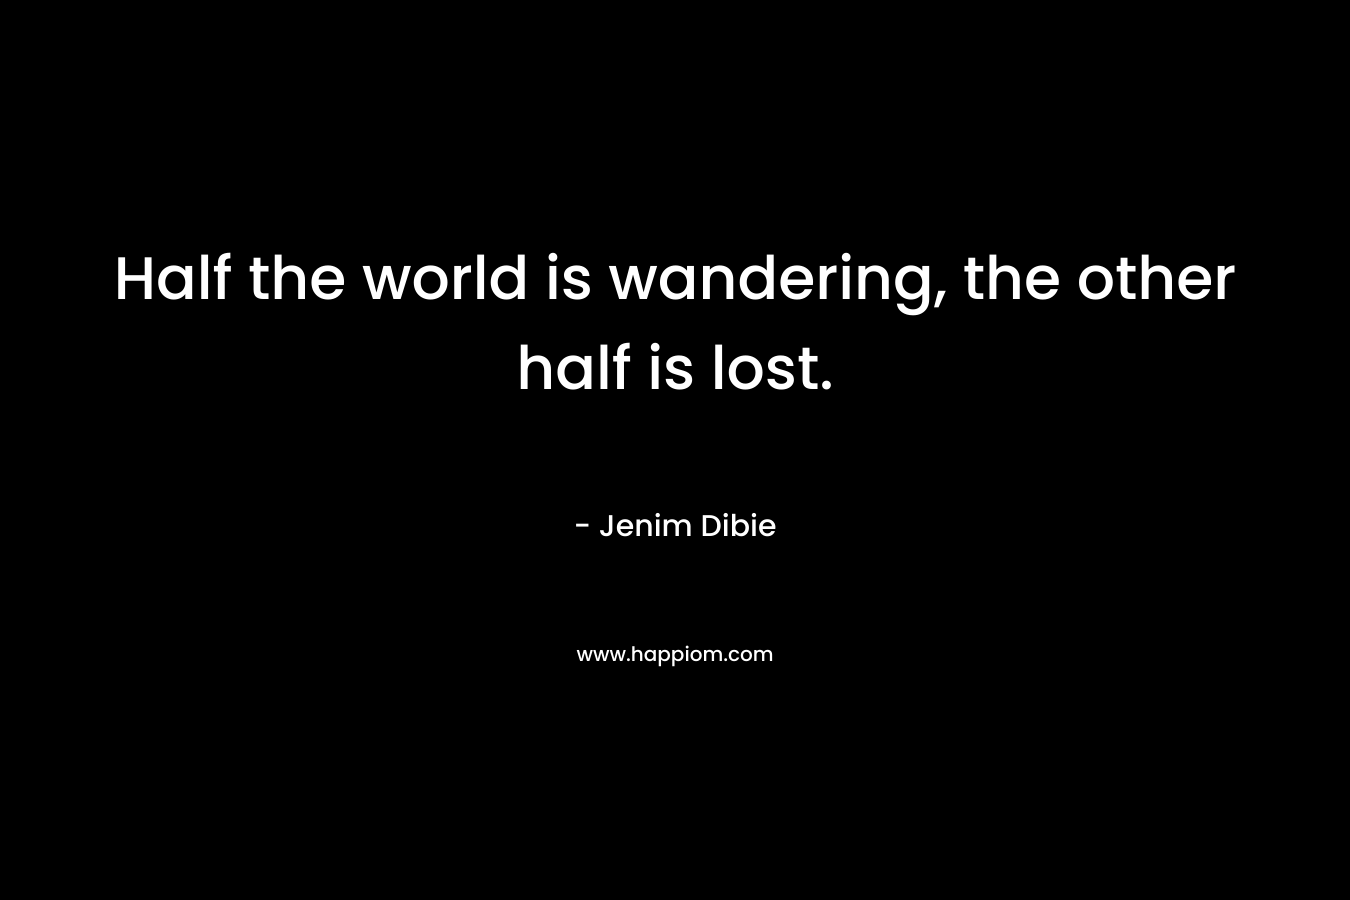 Half the world is wandering, the other half is lost. – Jenim Dibie